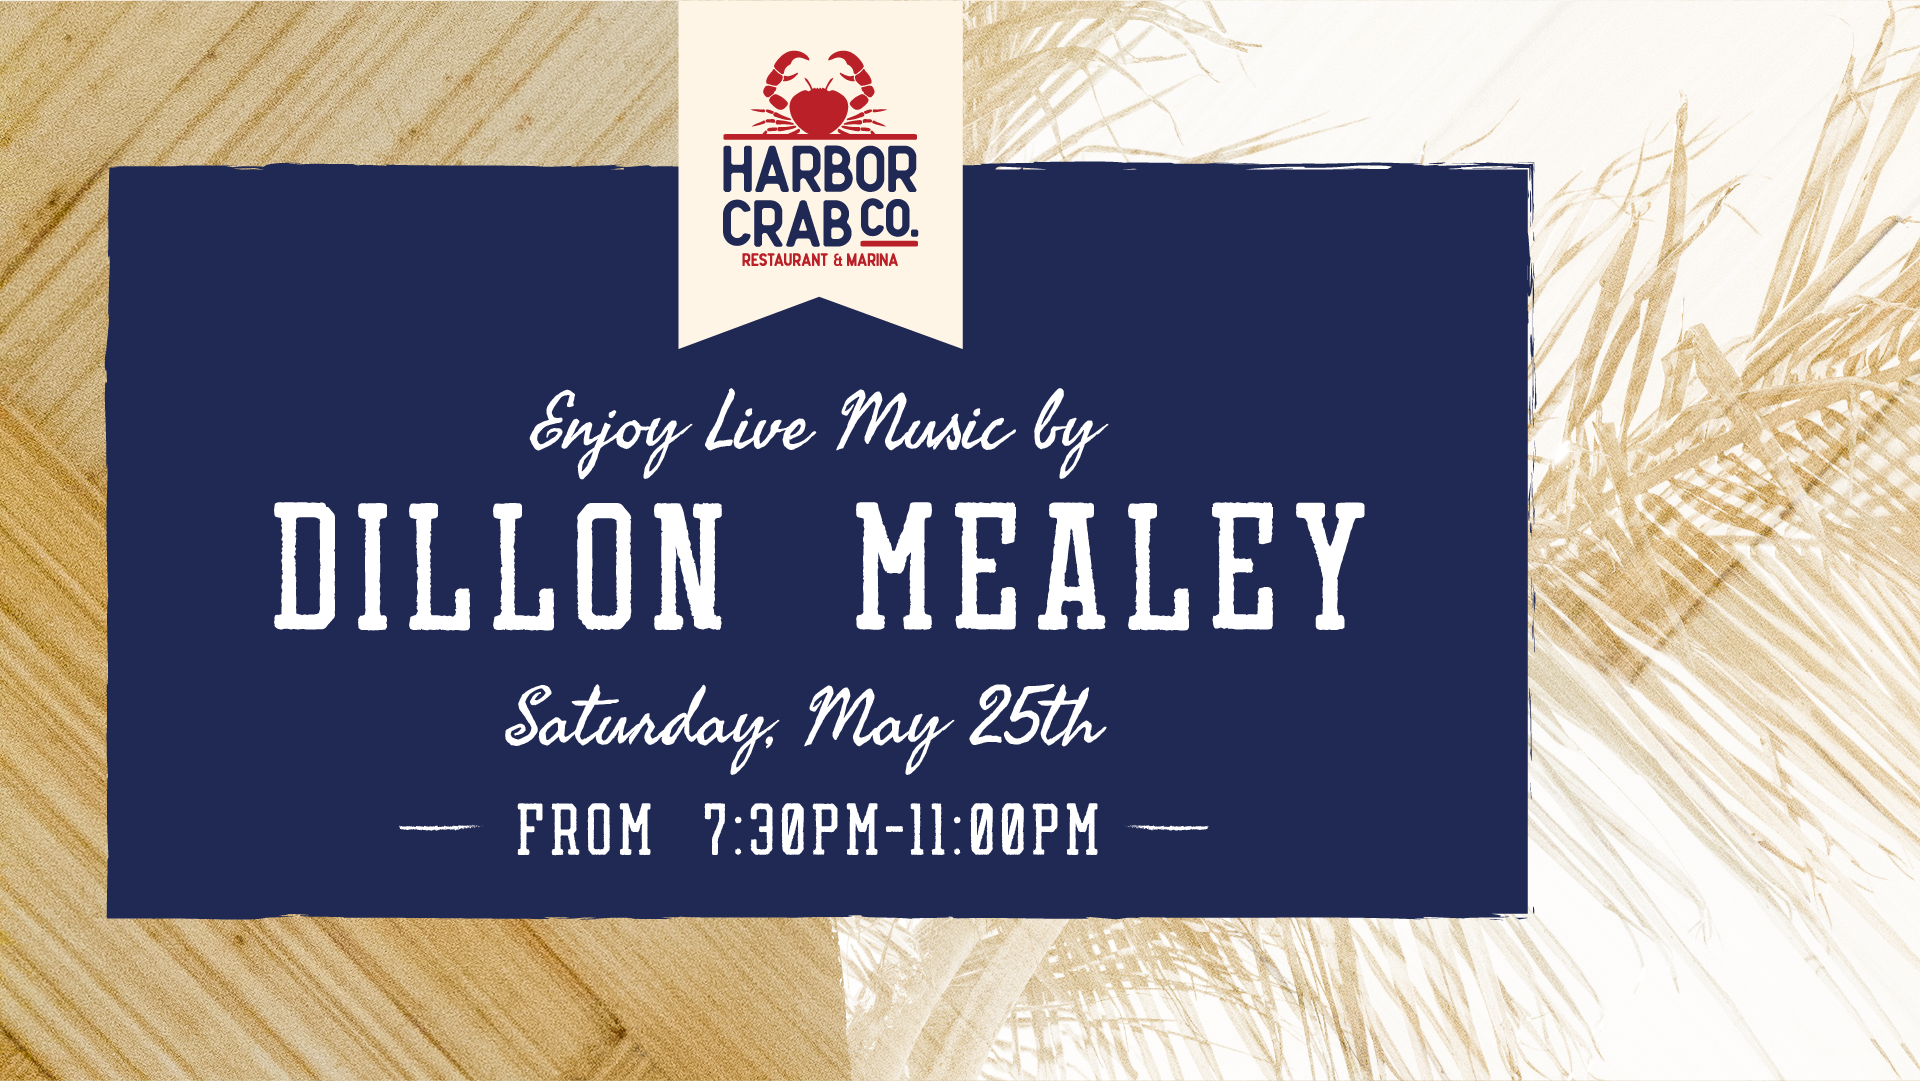 Live music by Dillon Mealy at Harbor Crab on May 25, from 7:30 pm to 11:00 pm.